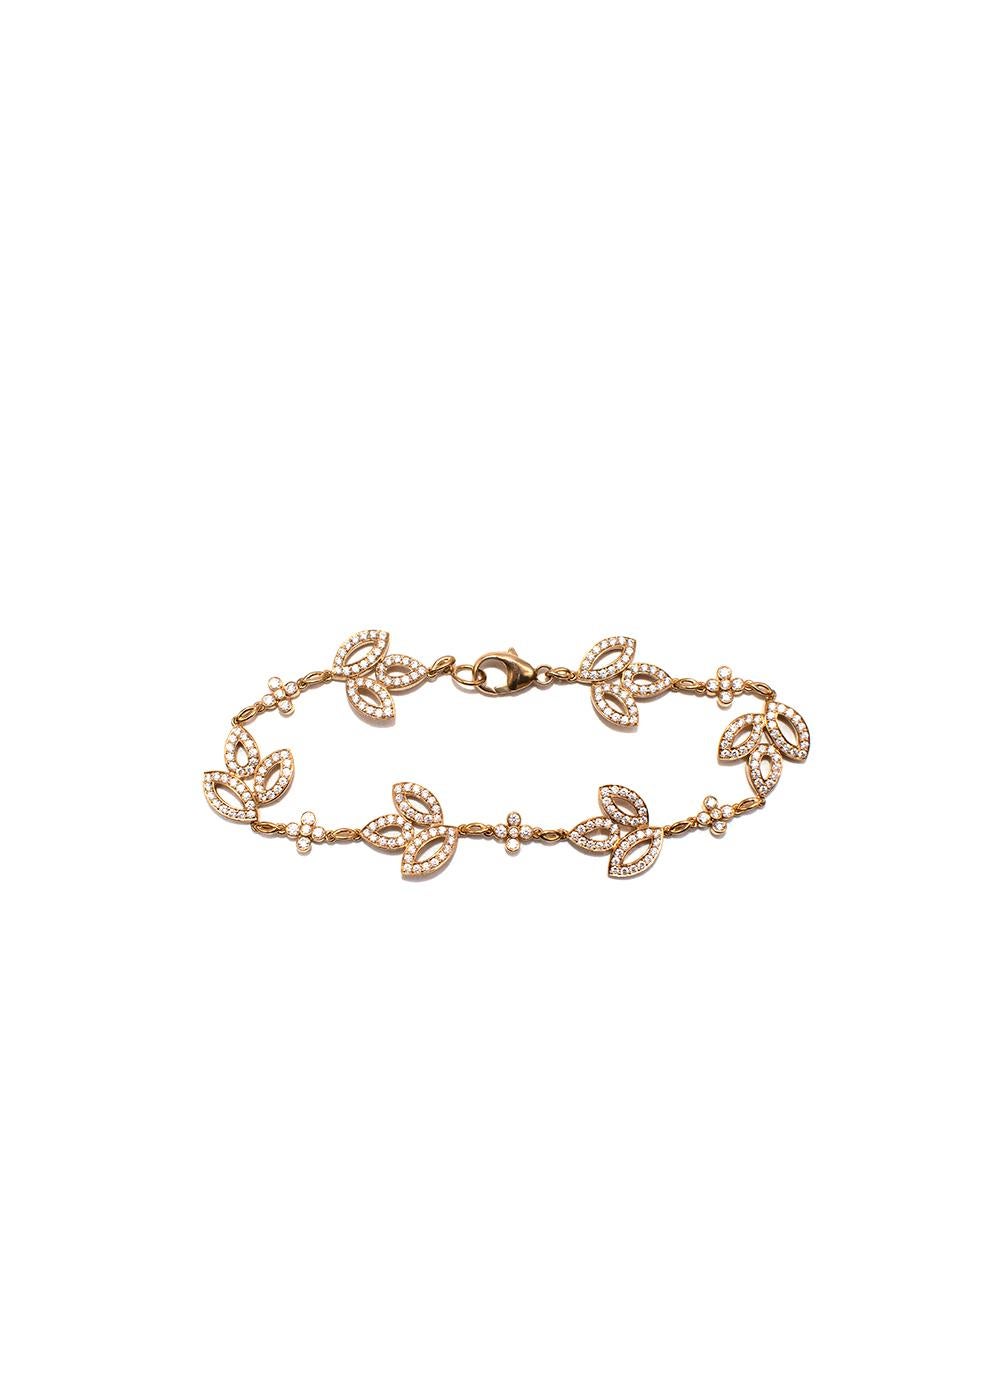 Harry Winston Lily Cluster Yellow Gold Diamond Bracelet

247 round brilliant diamonds weighing a total of approximately 1.70 carats, set in 18K yellow gold.

Collection based on an archival lily sketch.

For all its creations, Harry Winston selects